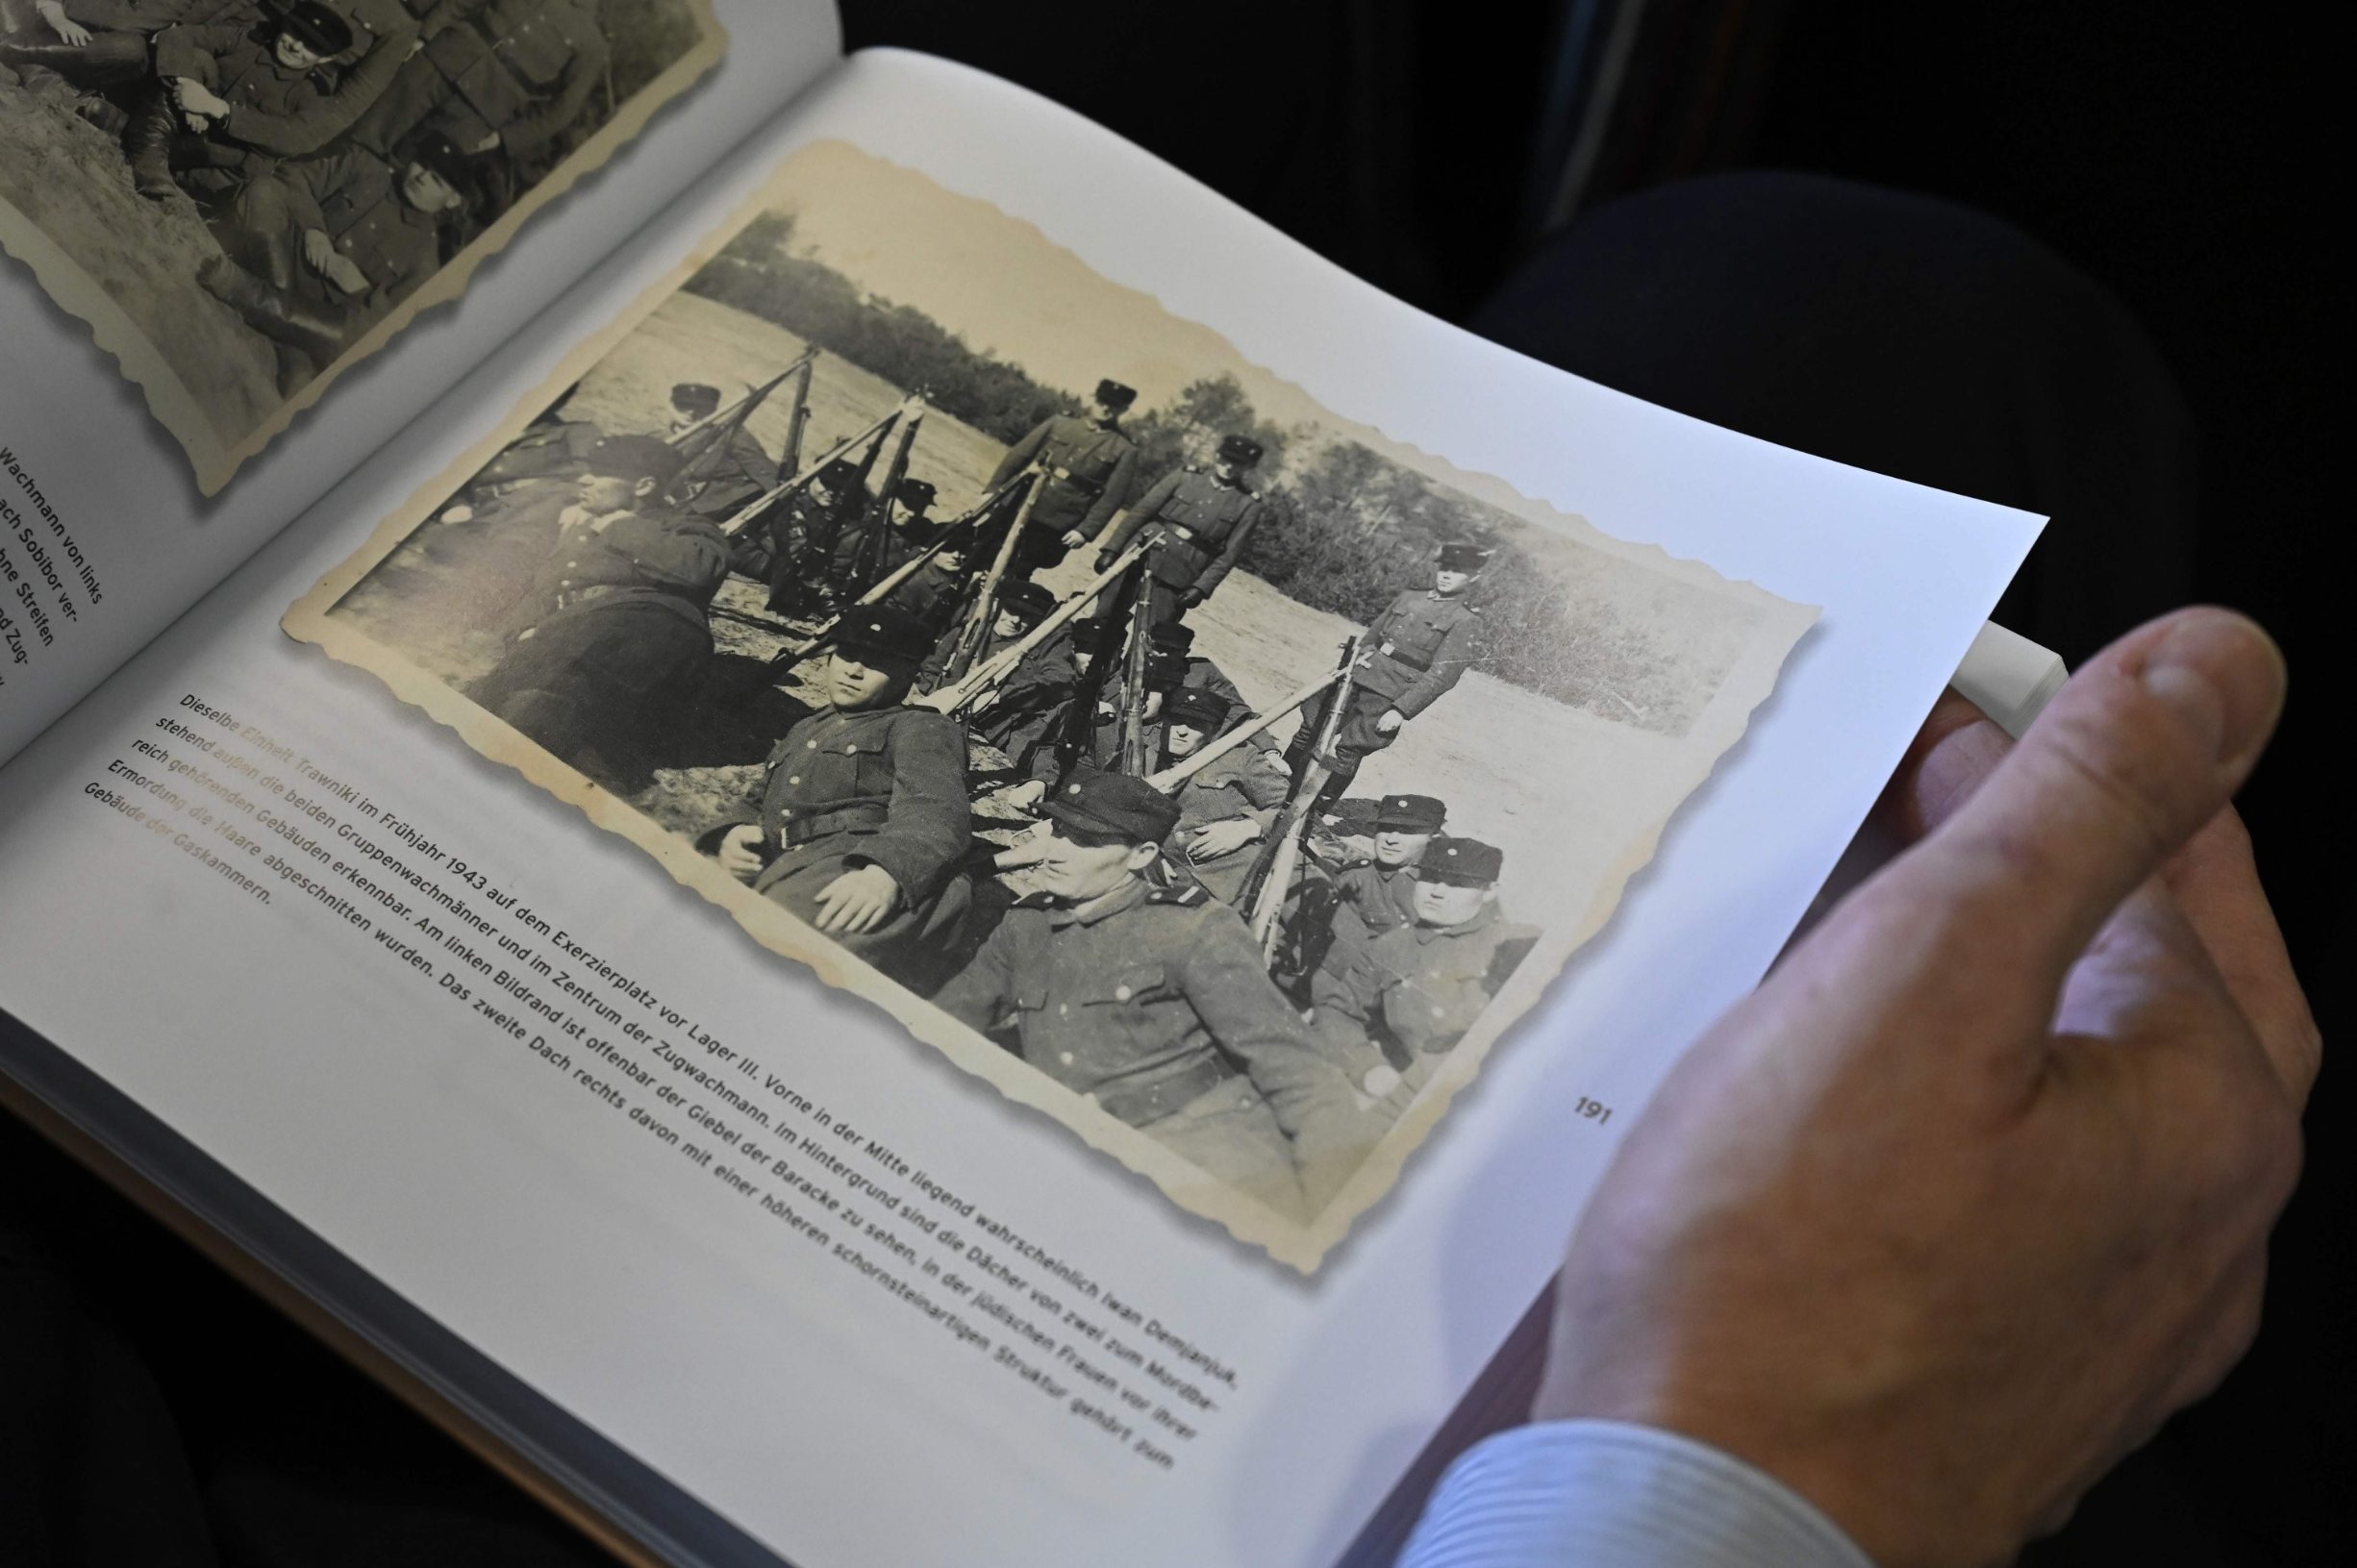 A journalist looks at a catalogue prior to a press conference to unveil newly discovered photos from Sobibor Nazi death camp on January 28, 2020 in Berlin. - A Berlin museum said on January 20, 2020 that it had unpublished photographs showing former guard John Demjanjuk at the Sobibor extermination camp, where he has denied ever having been. (Photo by Tobias SCHWARZ / AFP)